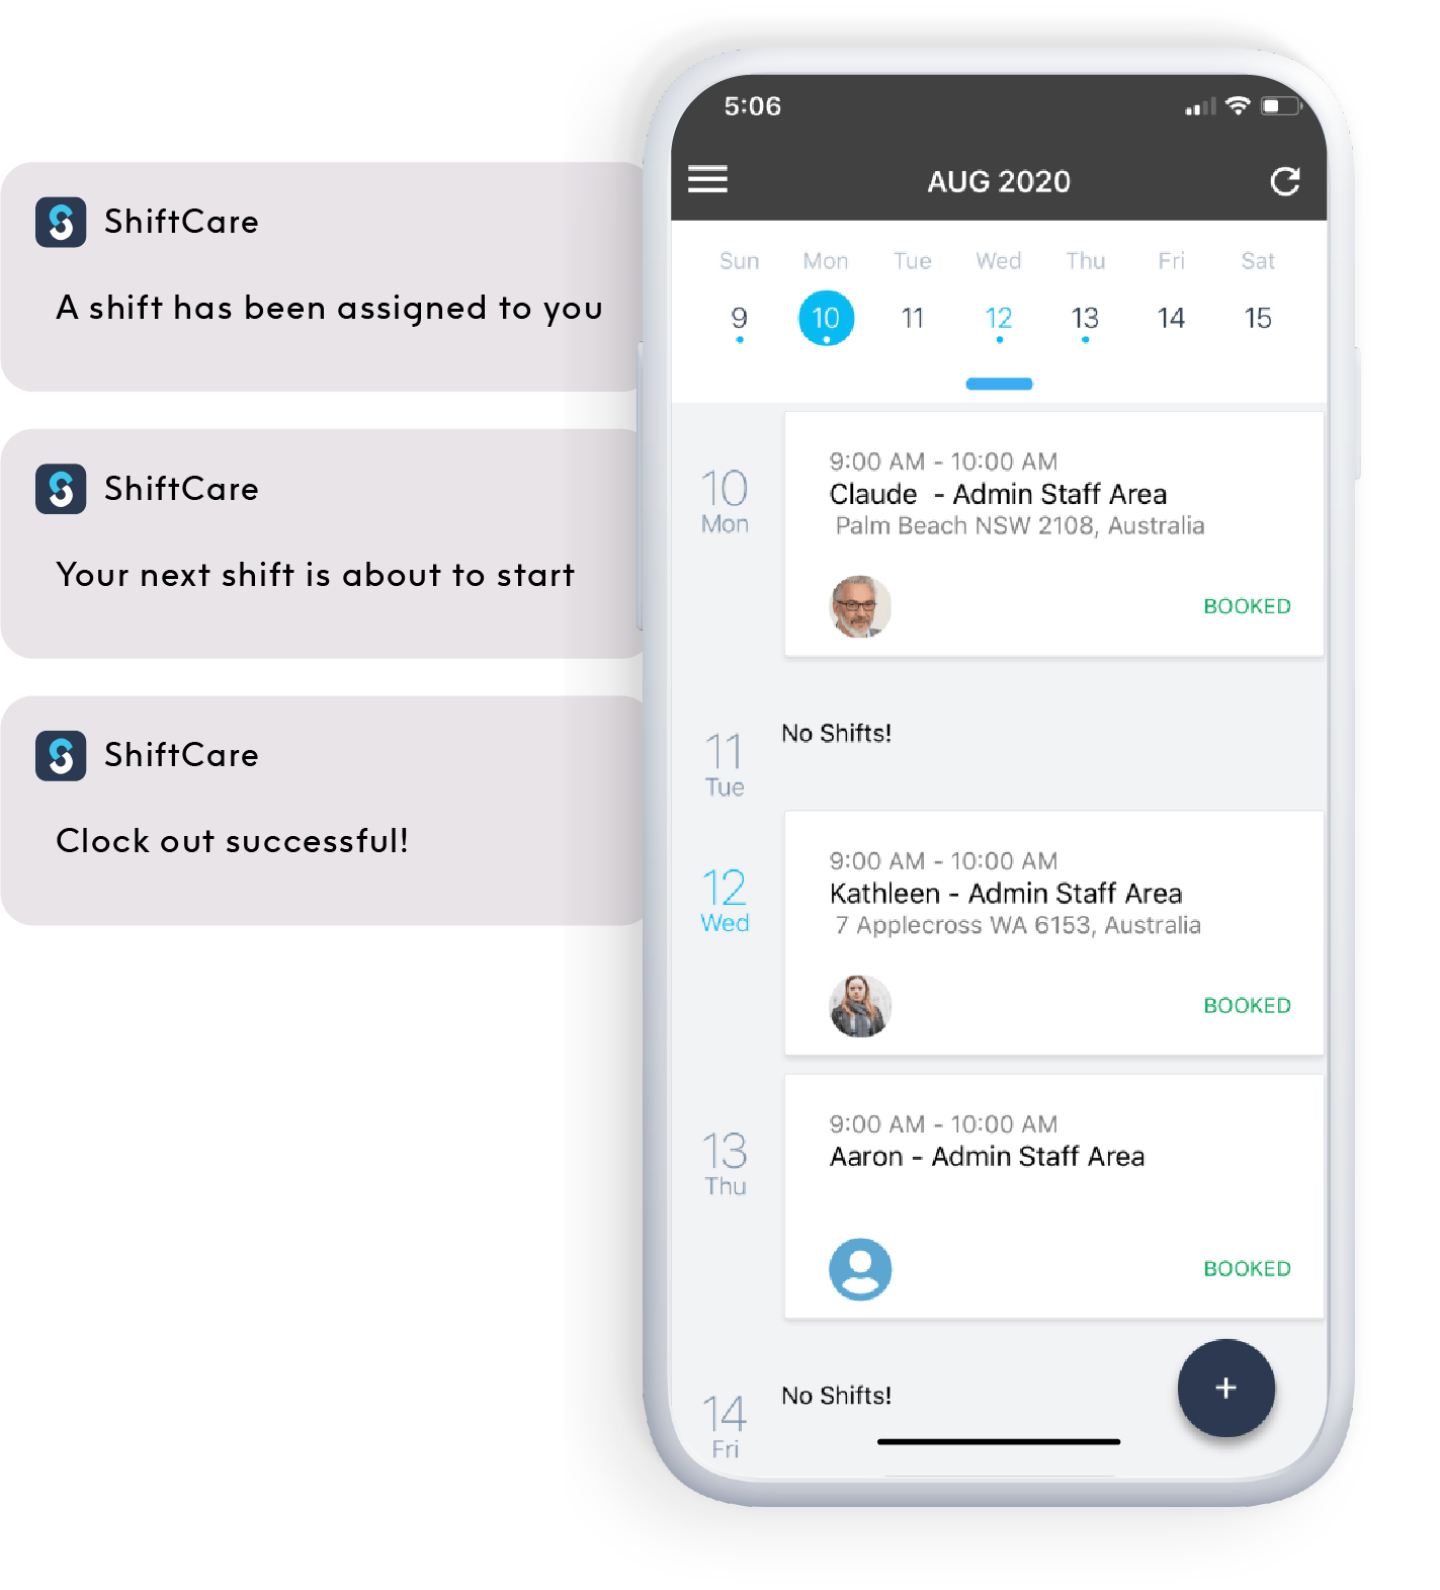 ShiftCare mobile app showing a worker's schedule with notifications for new shifts, upcoming shifts, and successful clock outs